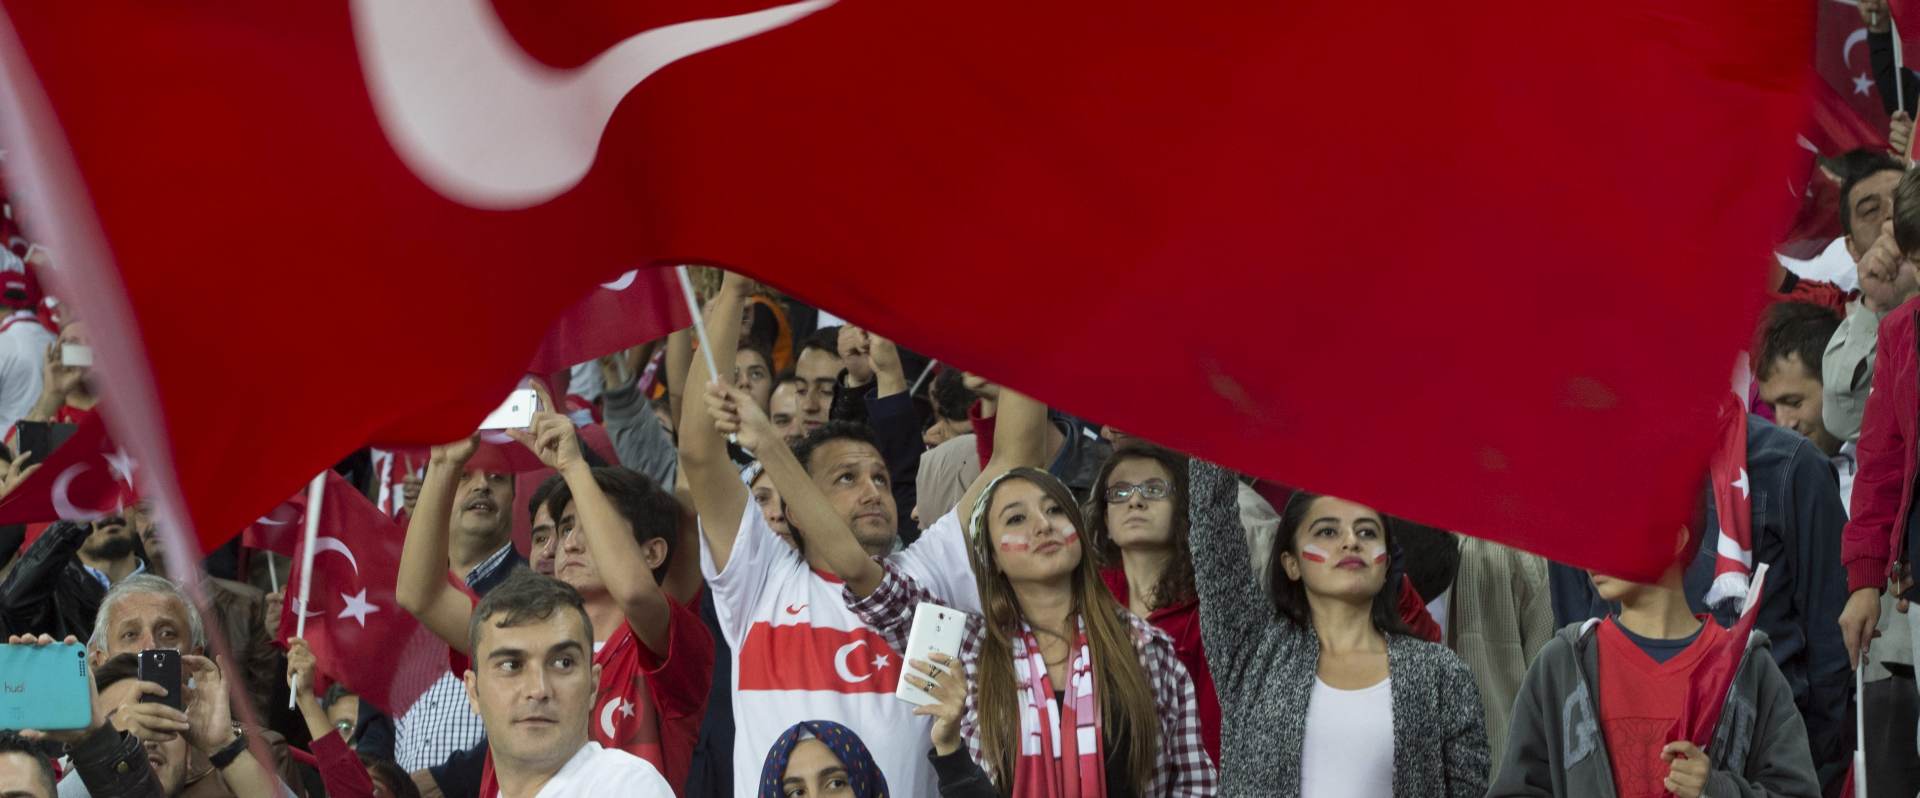 epa04976645 Turkish supporters cheer on their team  during the UEFA EURO 2016 group A qualifying match between Turkey and lceland in Konya, Turkey, 13 October 2015.  EPA/TOLGA BOZOGLU